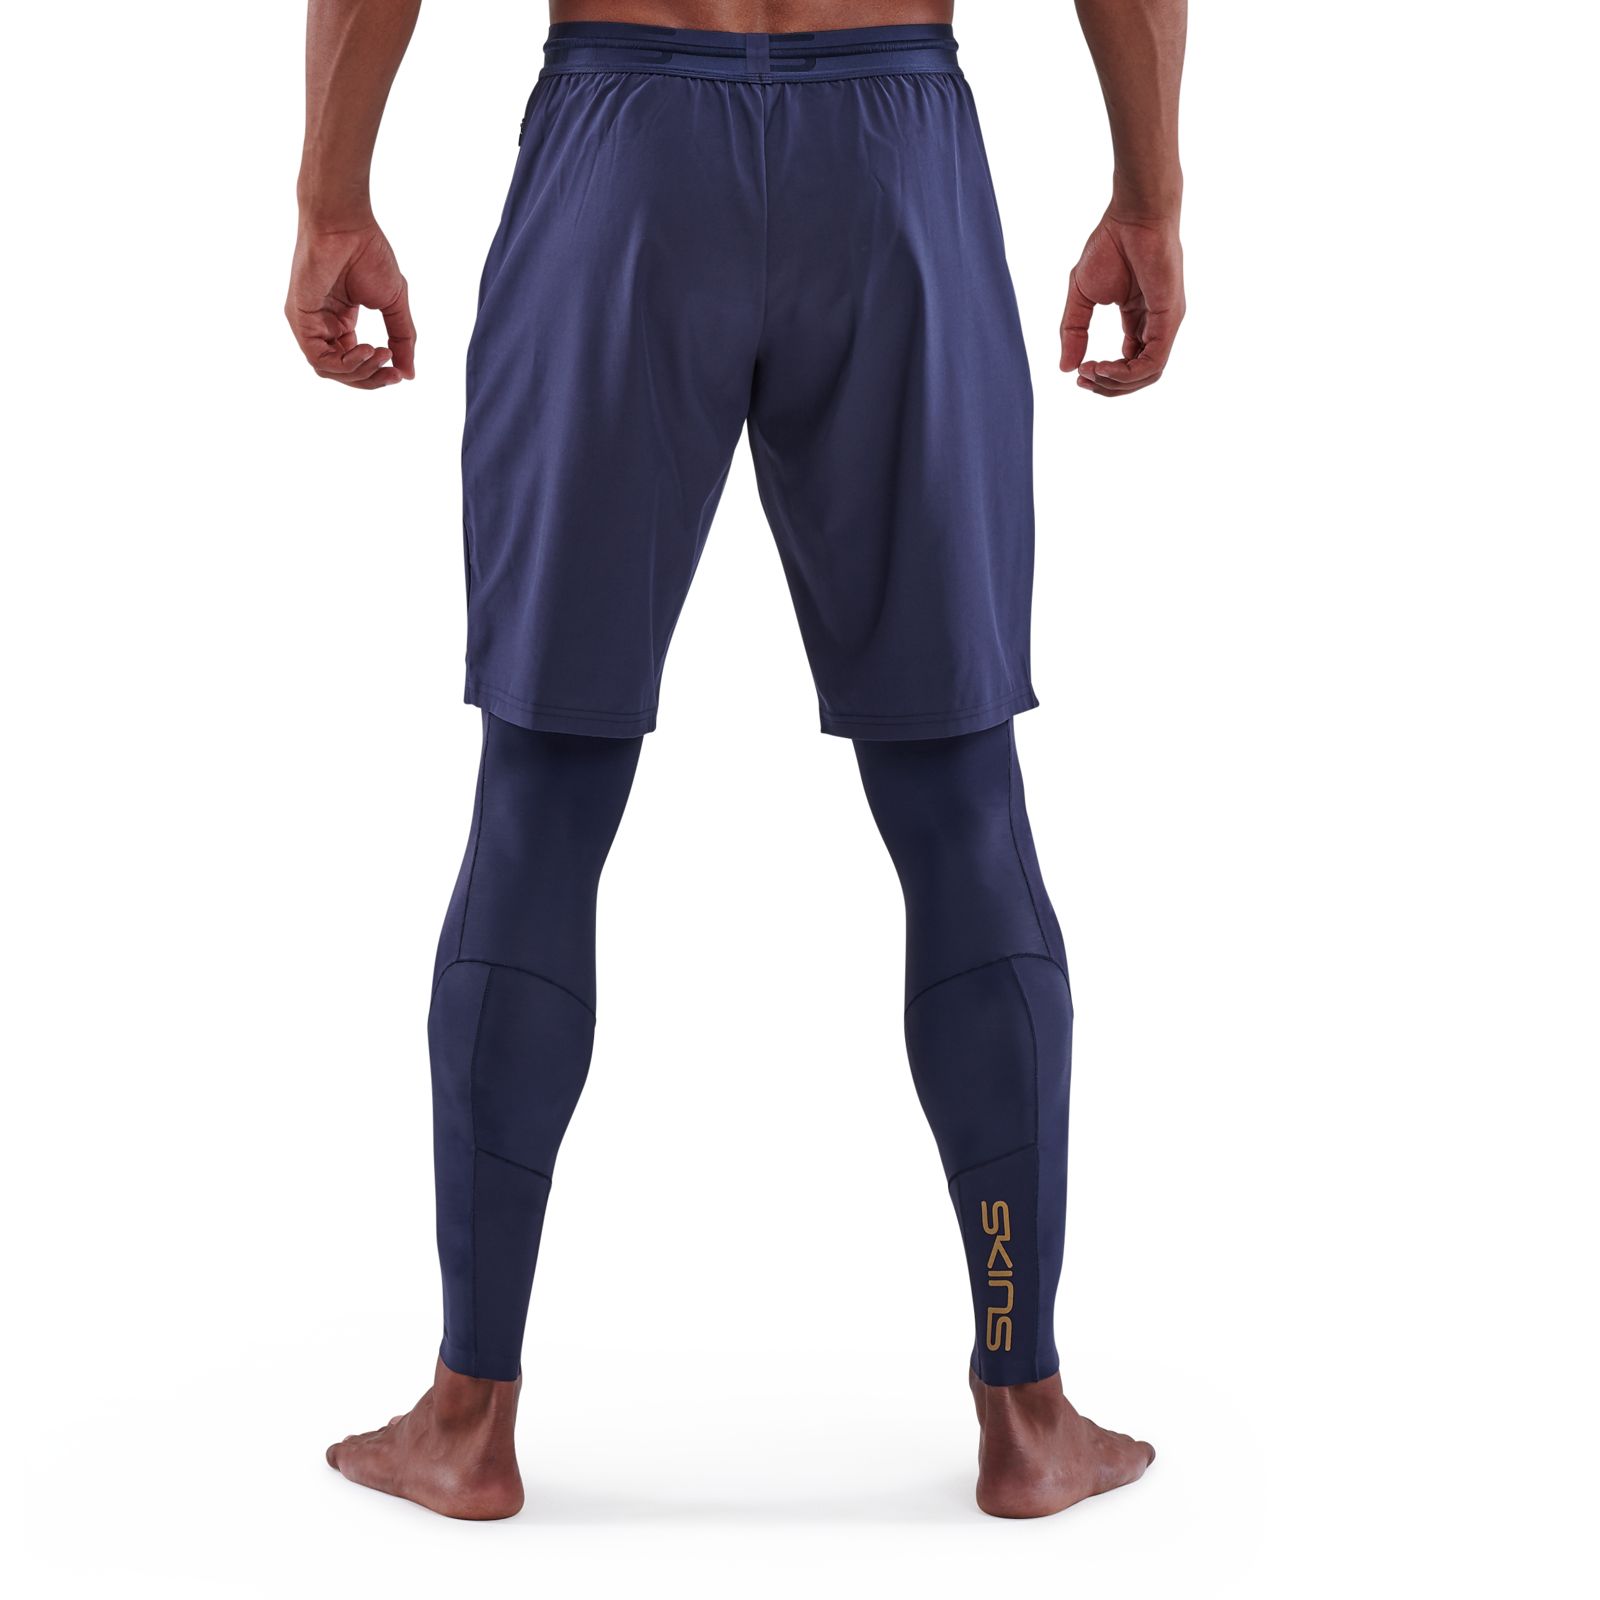 SKINS SERIES-3 MEN'S TRAVEL AND RECOVERY LONG TIGHTS NAVY BLUE - SKINS  Compression USA